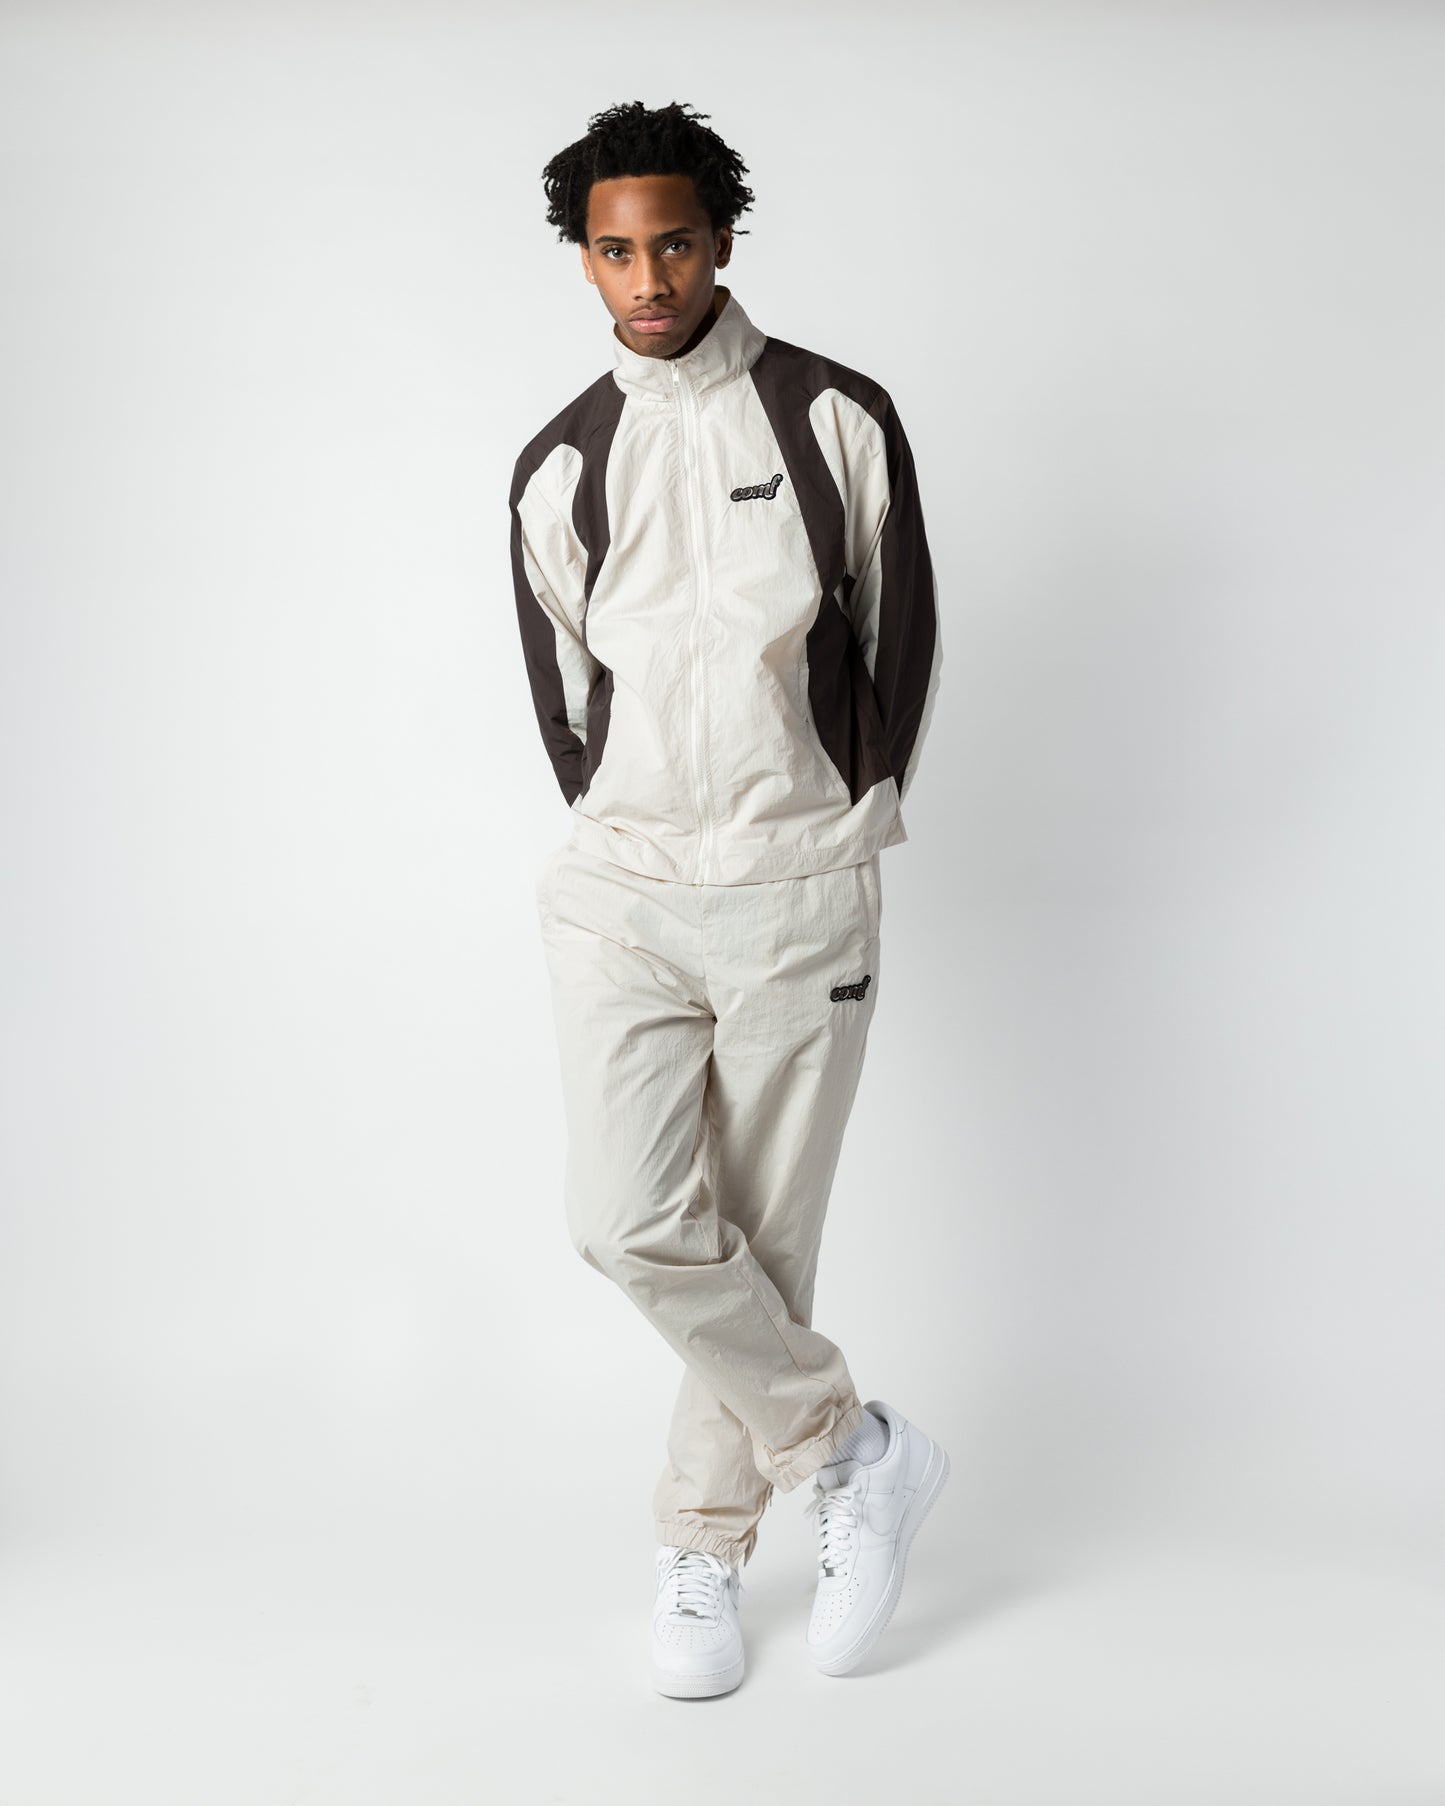 The Comf Tracksuit "Queens"